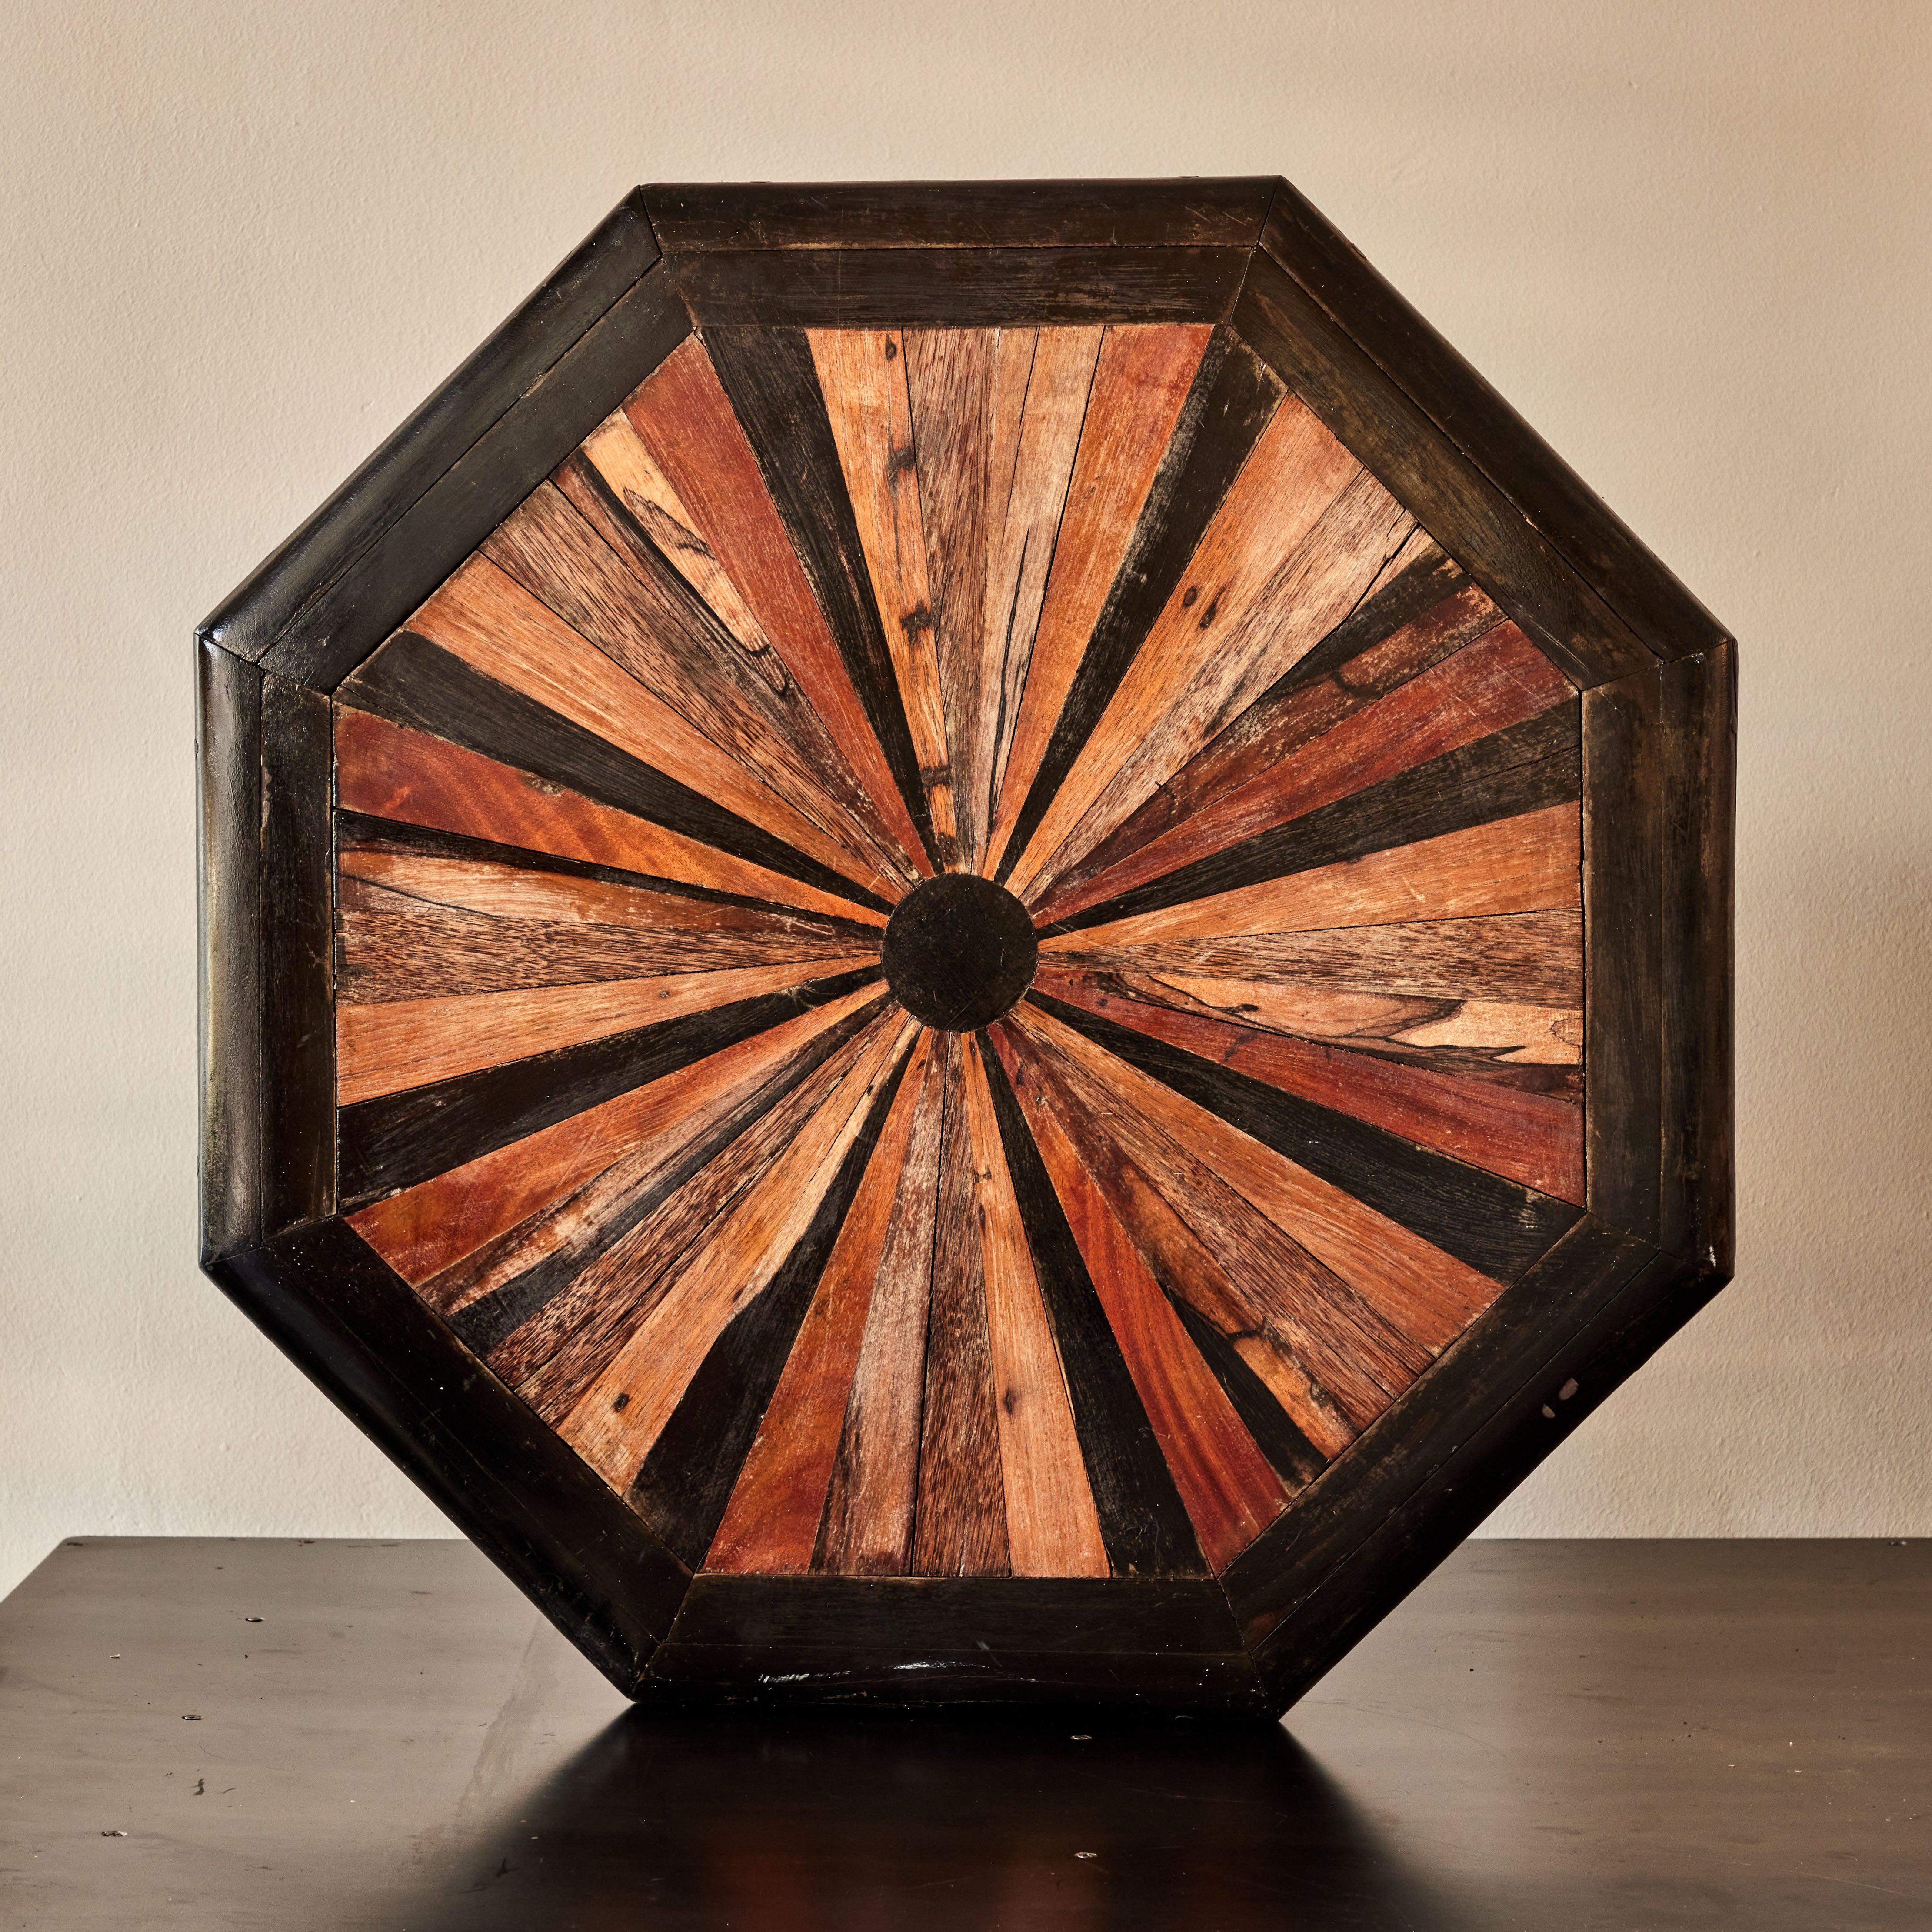 Octagonal wall panel of multi-colored wood specimens. A striking example of trompe l'ceil woodworking design, this early 19th-century English architectural element has a warm, graphic appeal. Featuring an ebonized border and sunburst pattern in